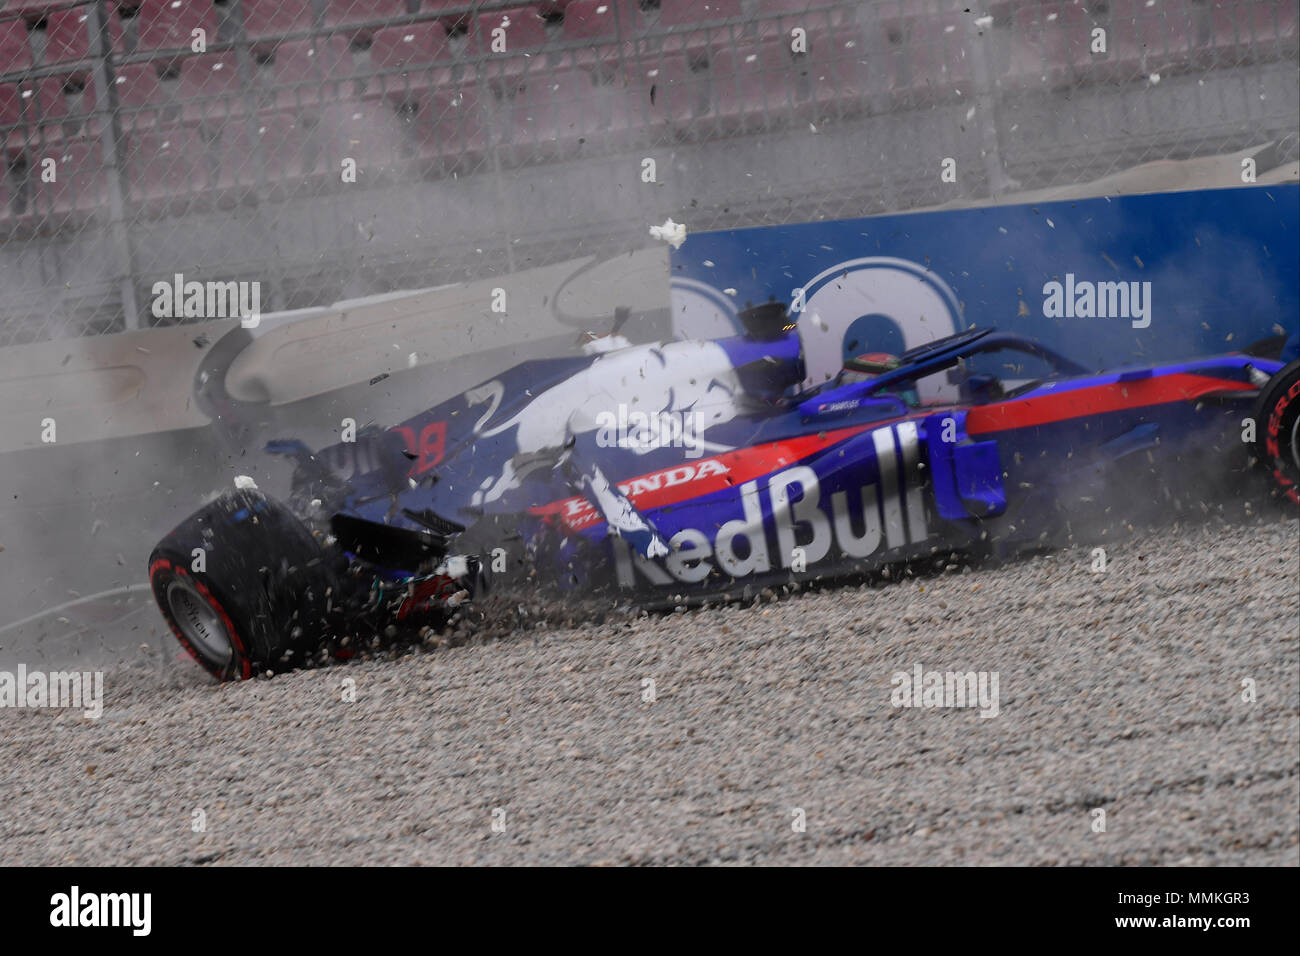 Barcelona, Spain. 12th May 2018. Brendon Hartley of New Zealand and Scuderia Toro Rosso driver's crash during the qualifying for Spanish Formula One Grand Prix at Circuit de Catalunya on May 12, 2018 in Montmelo, Spain.  (Photo by Quality Sport Images/Getty Images) Credit: CORDON PRESS/Alamy Live News Stock Photo